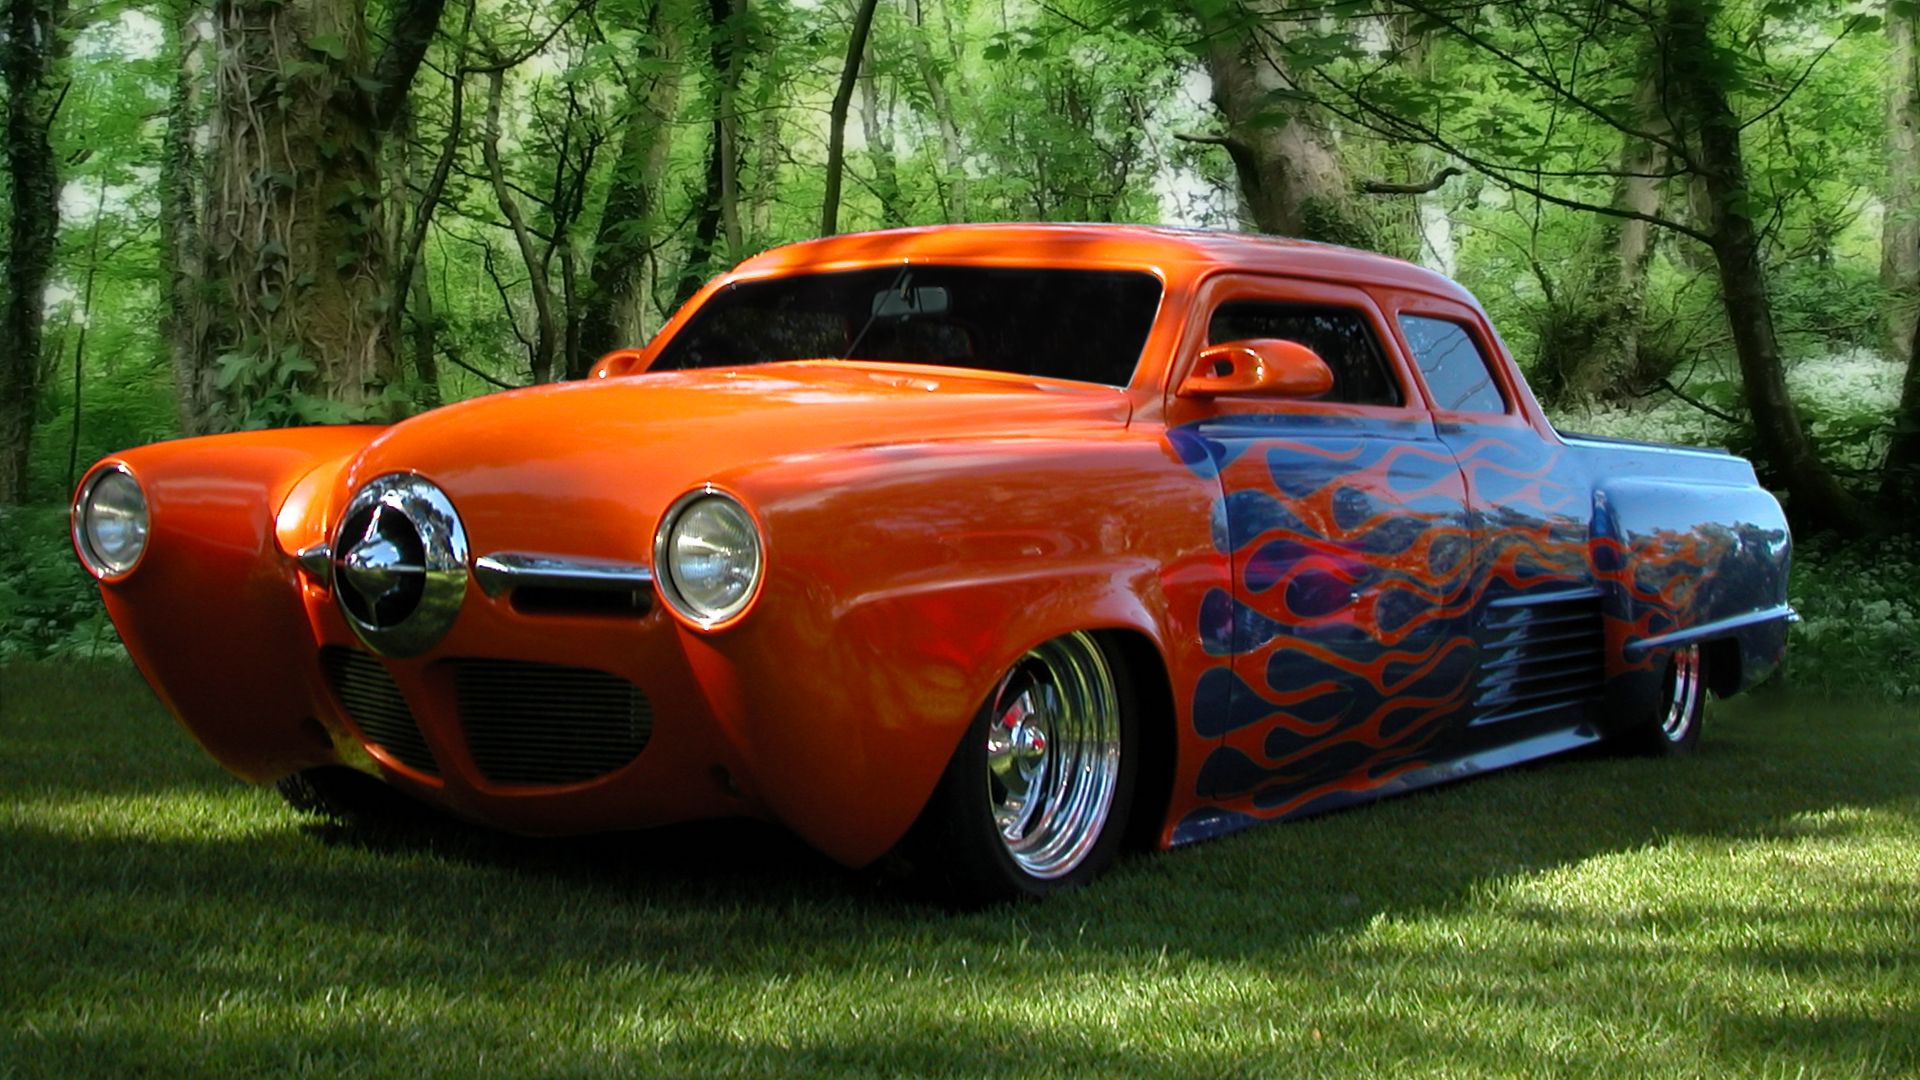 556 Hot Rod HD Wallpapers | Backgrounds - Wallpaper Abyss